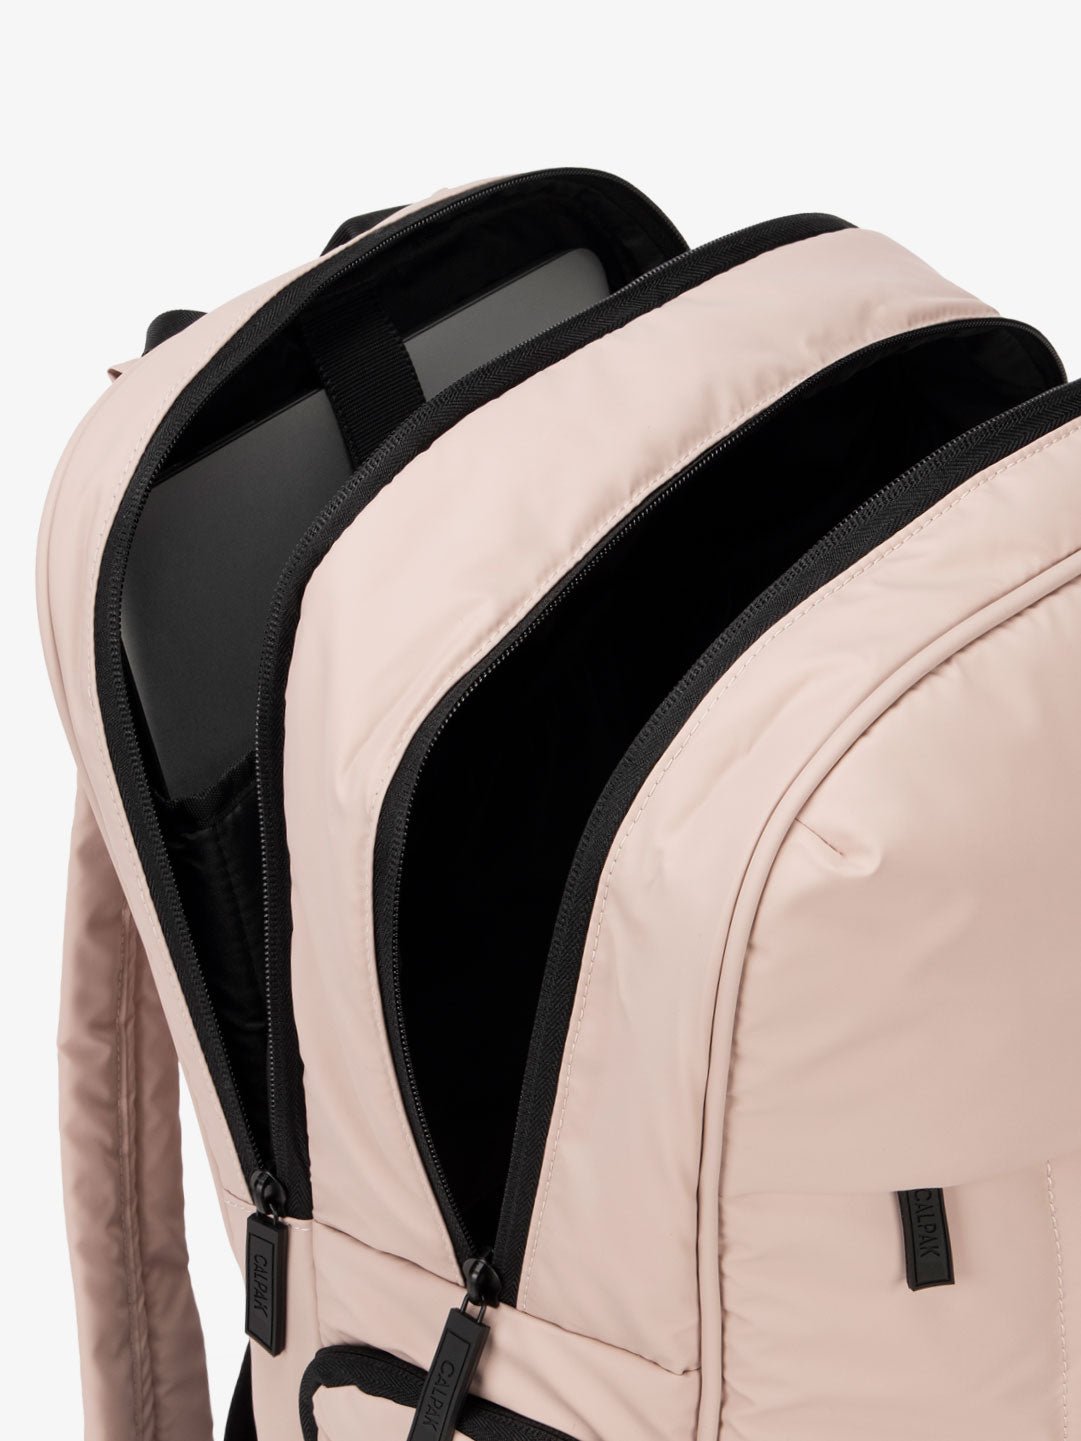 Luka 17 inch Laptop Back with multiple pockets including padded laptop sleeve for 17.5" laptop in pink